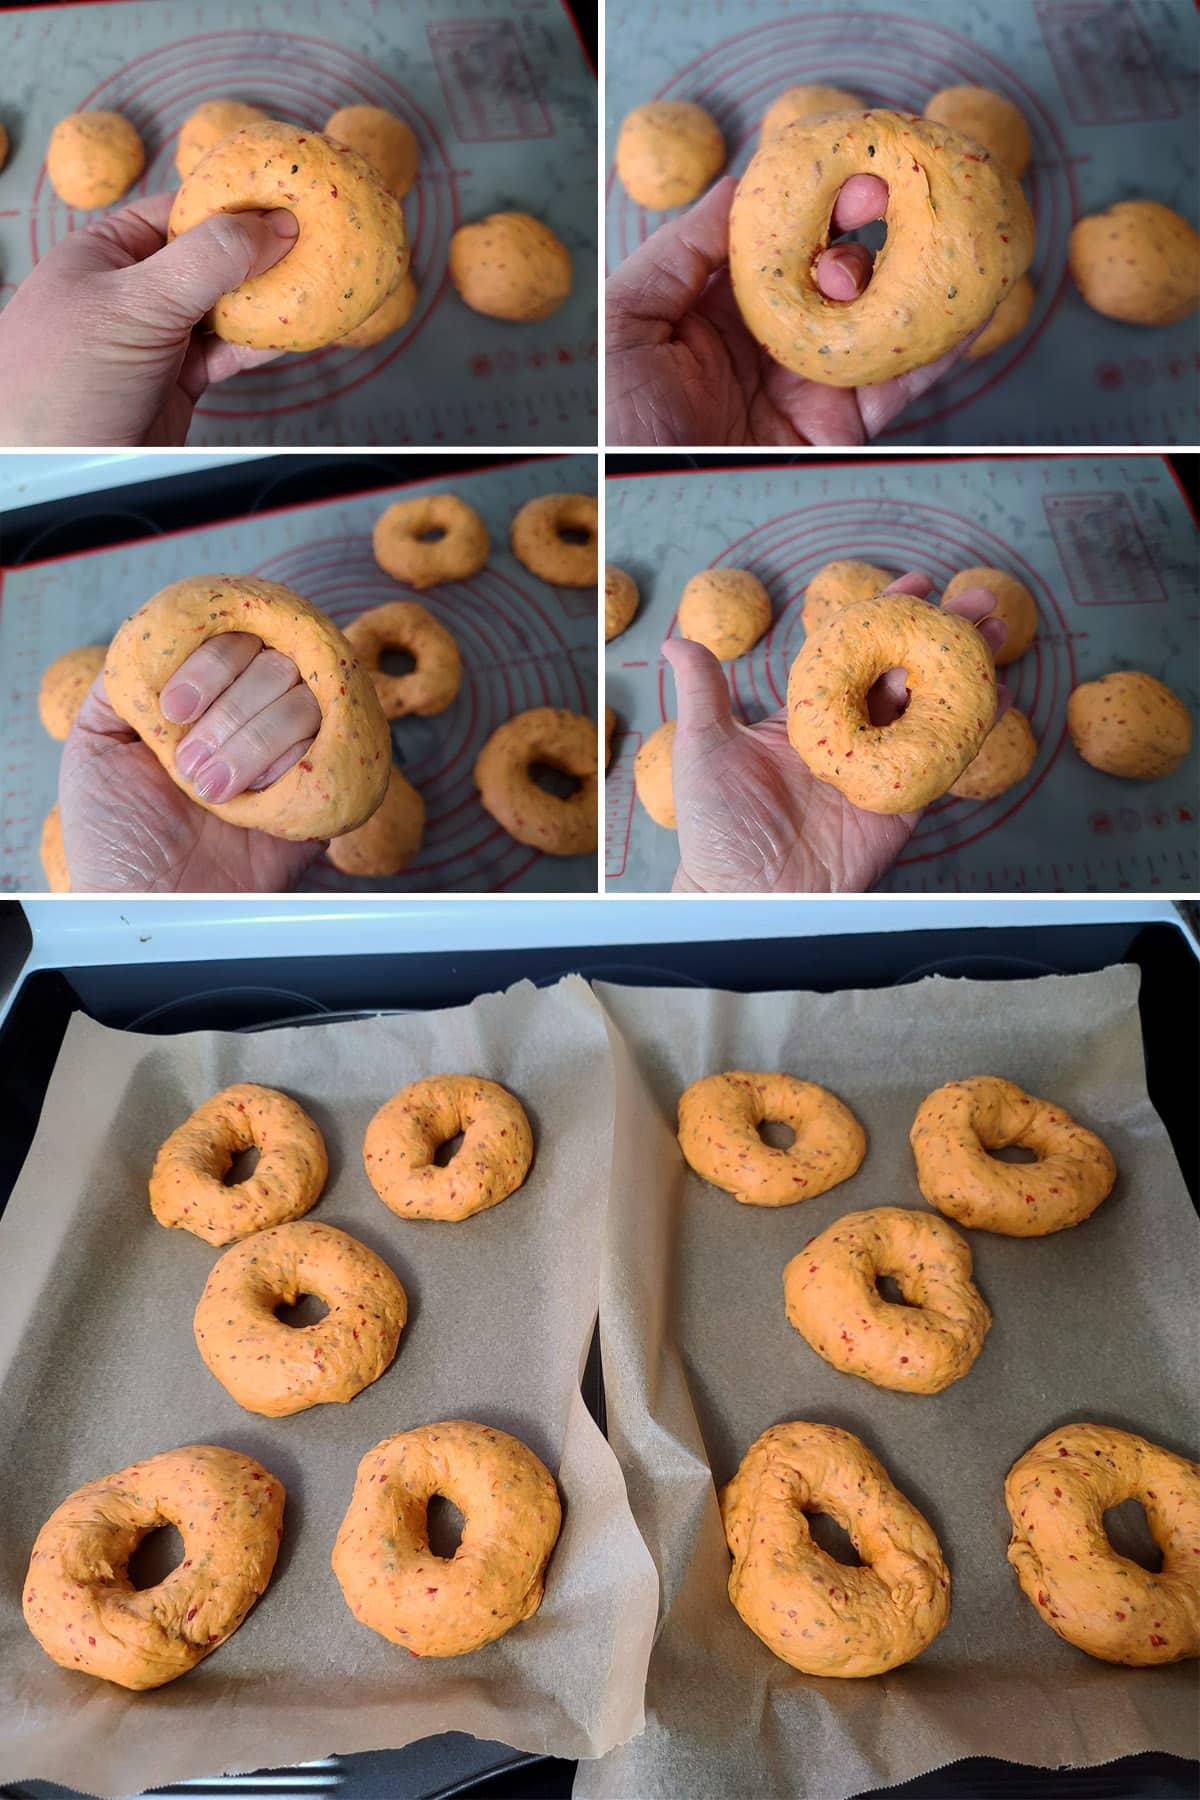 A 5 part image showing a dough ball being formed into a bagel and added to a pan of formed bagels.